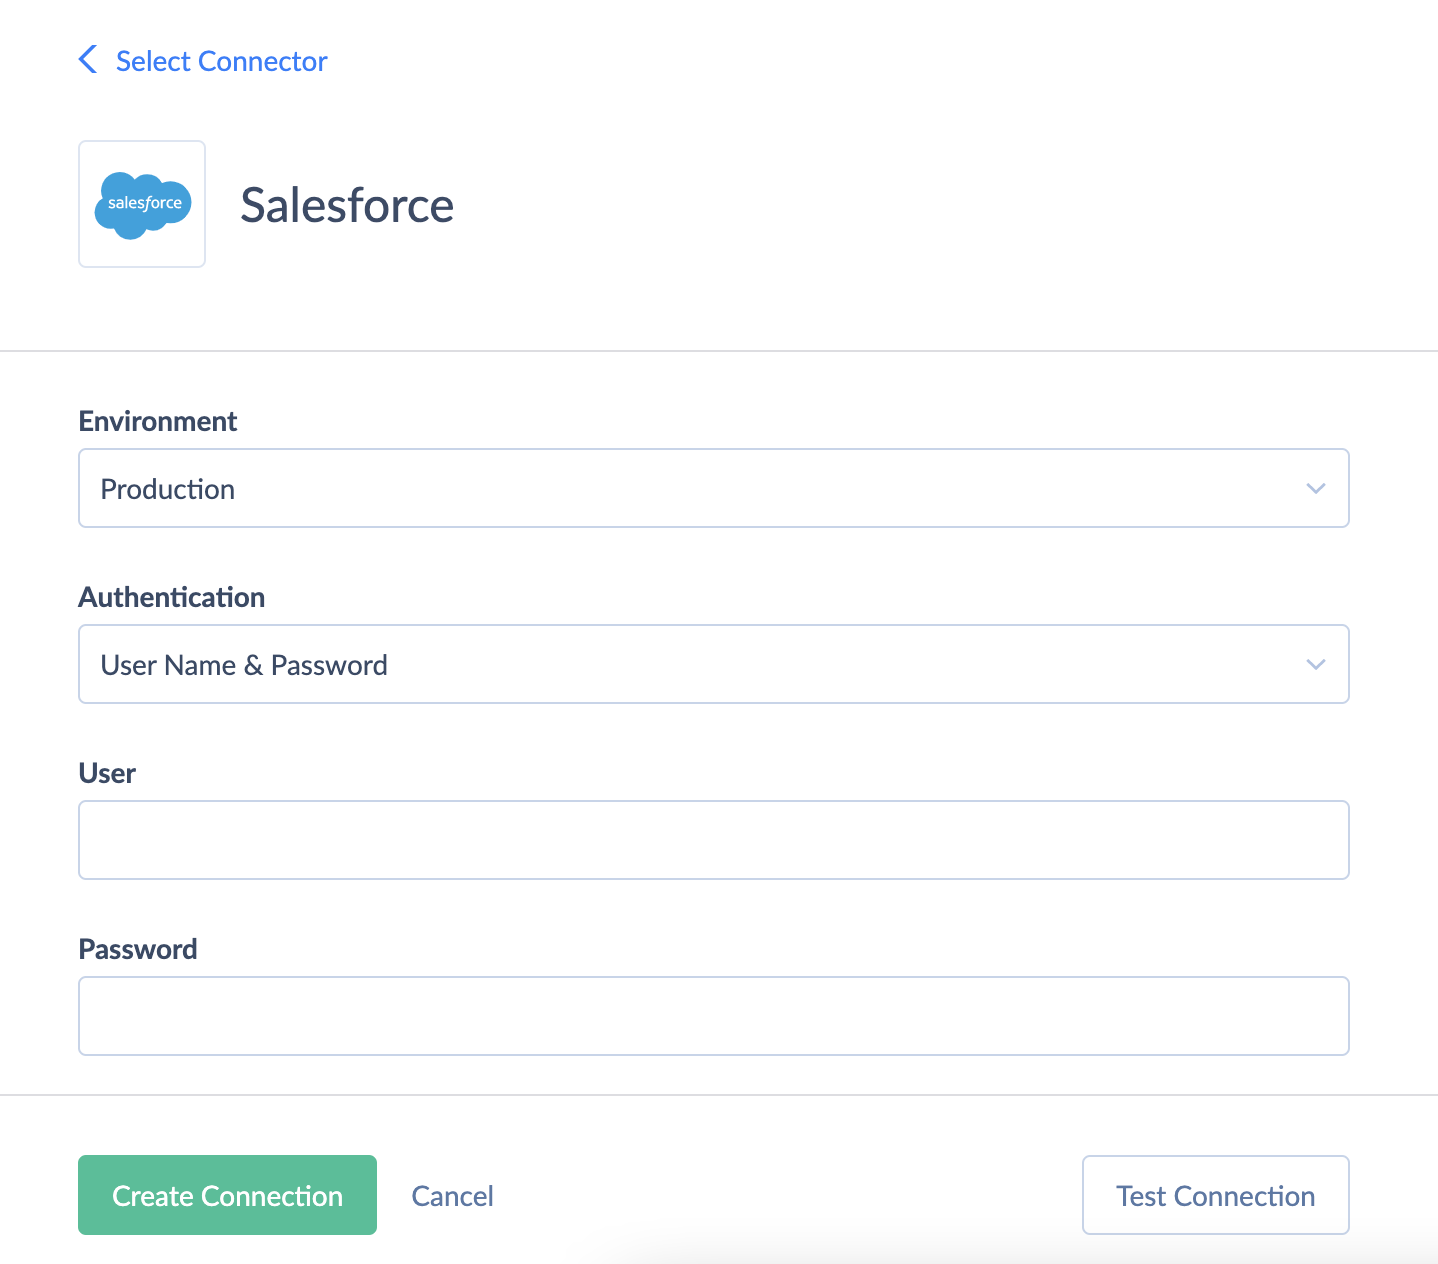 Salesforce User Name & Password connection